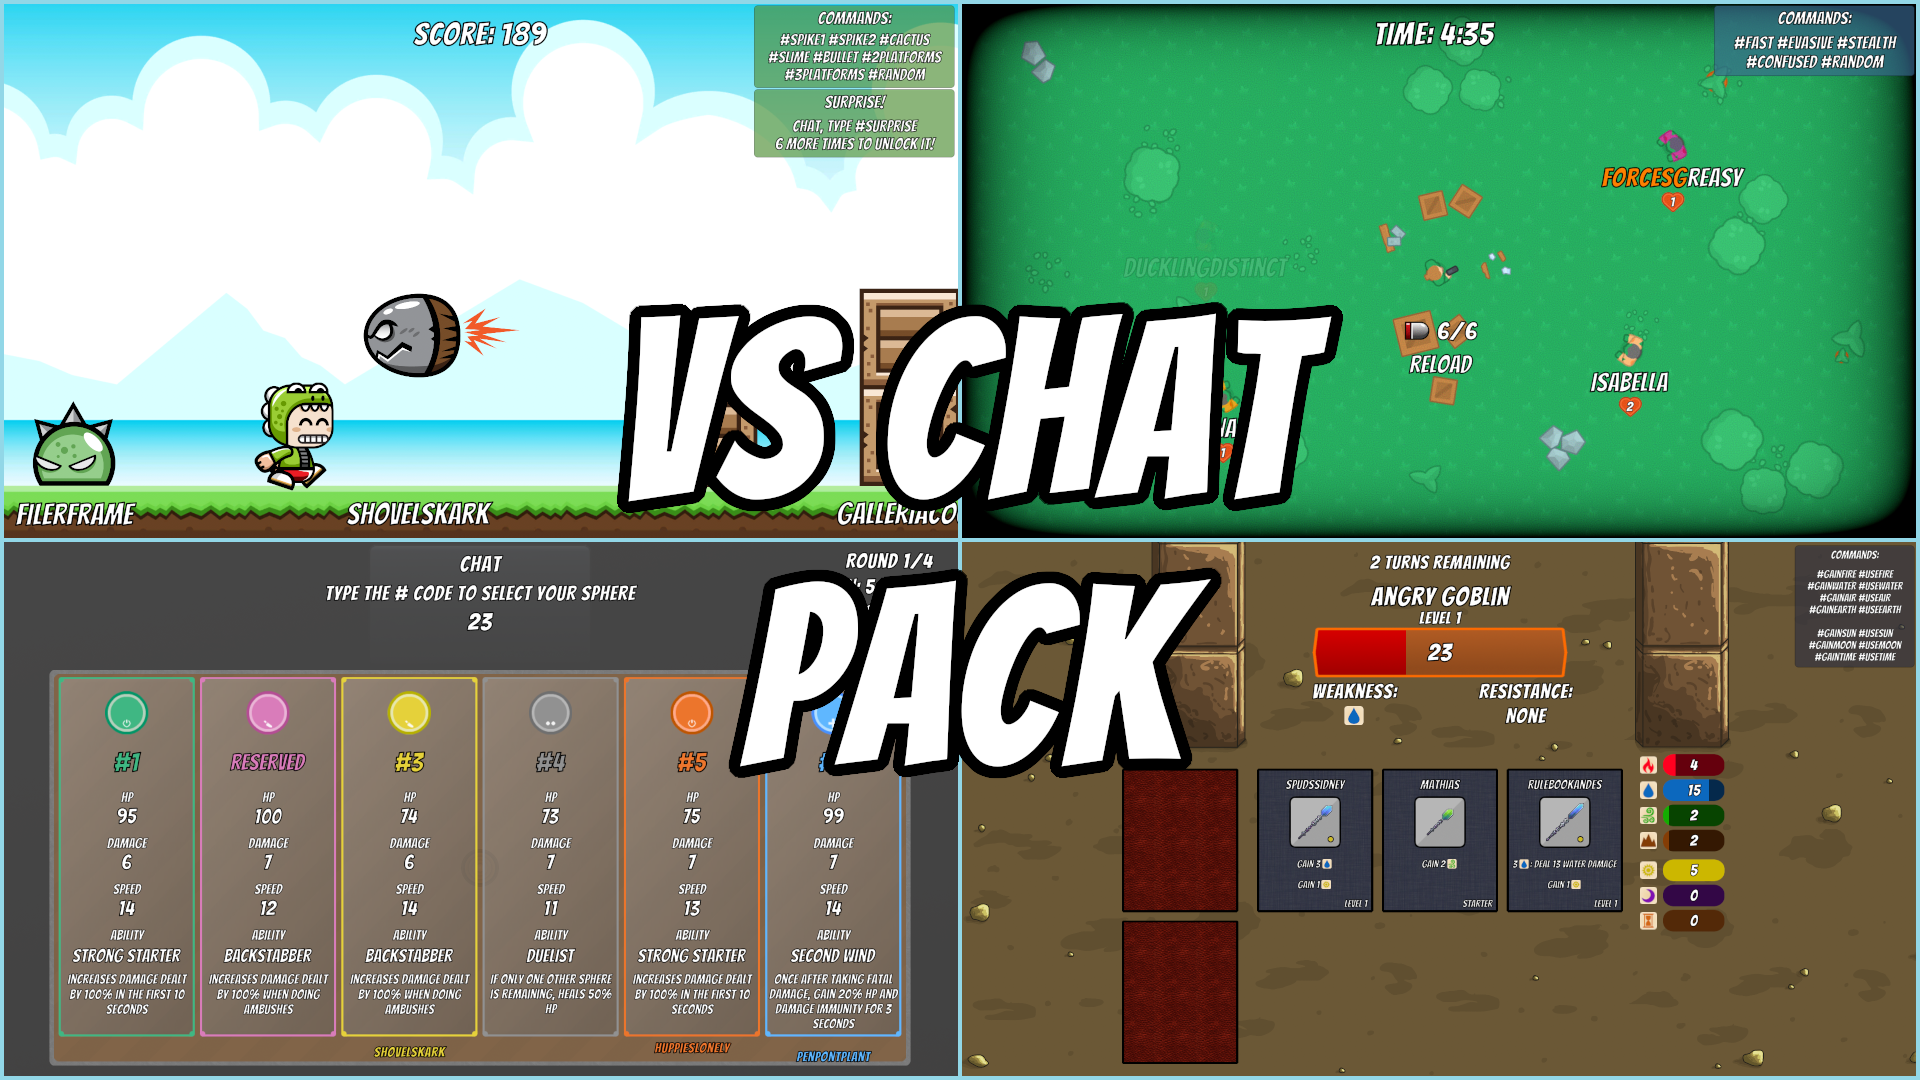 Vs Chat Pack for Twitch fans is launched today! information